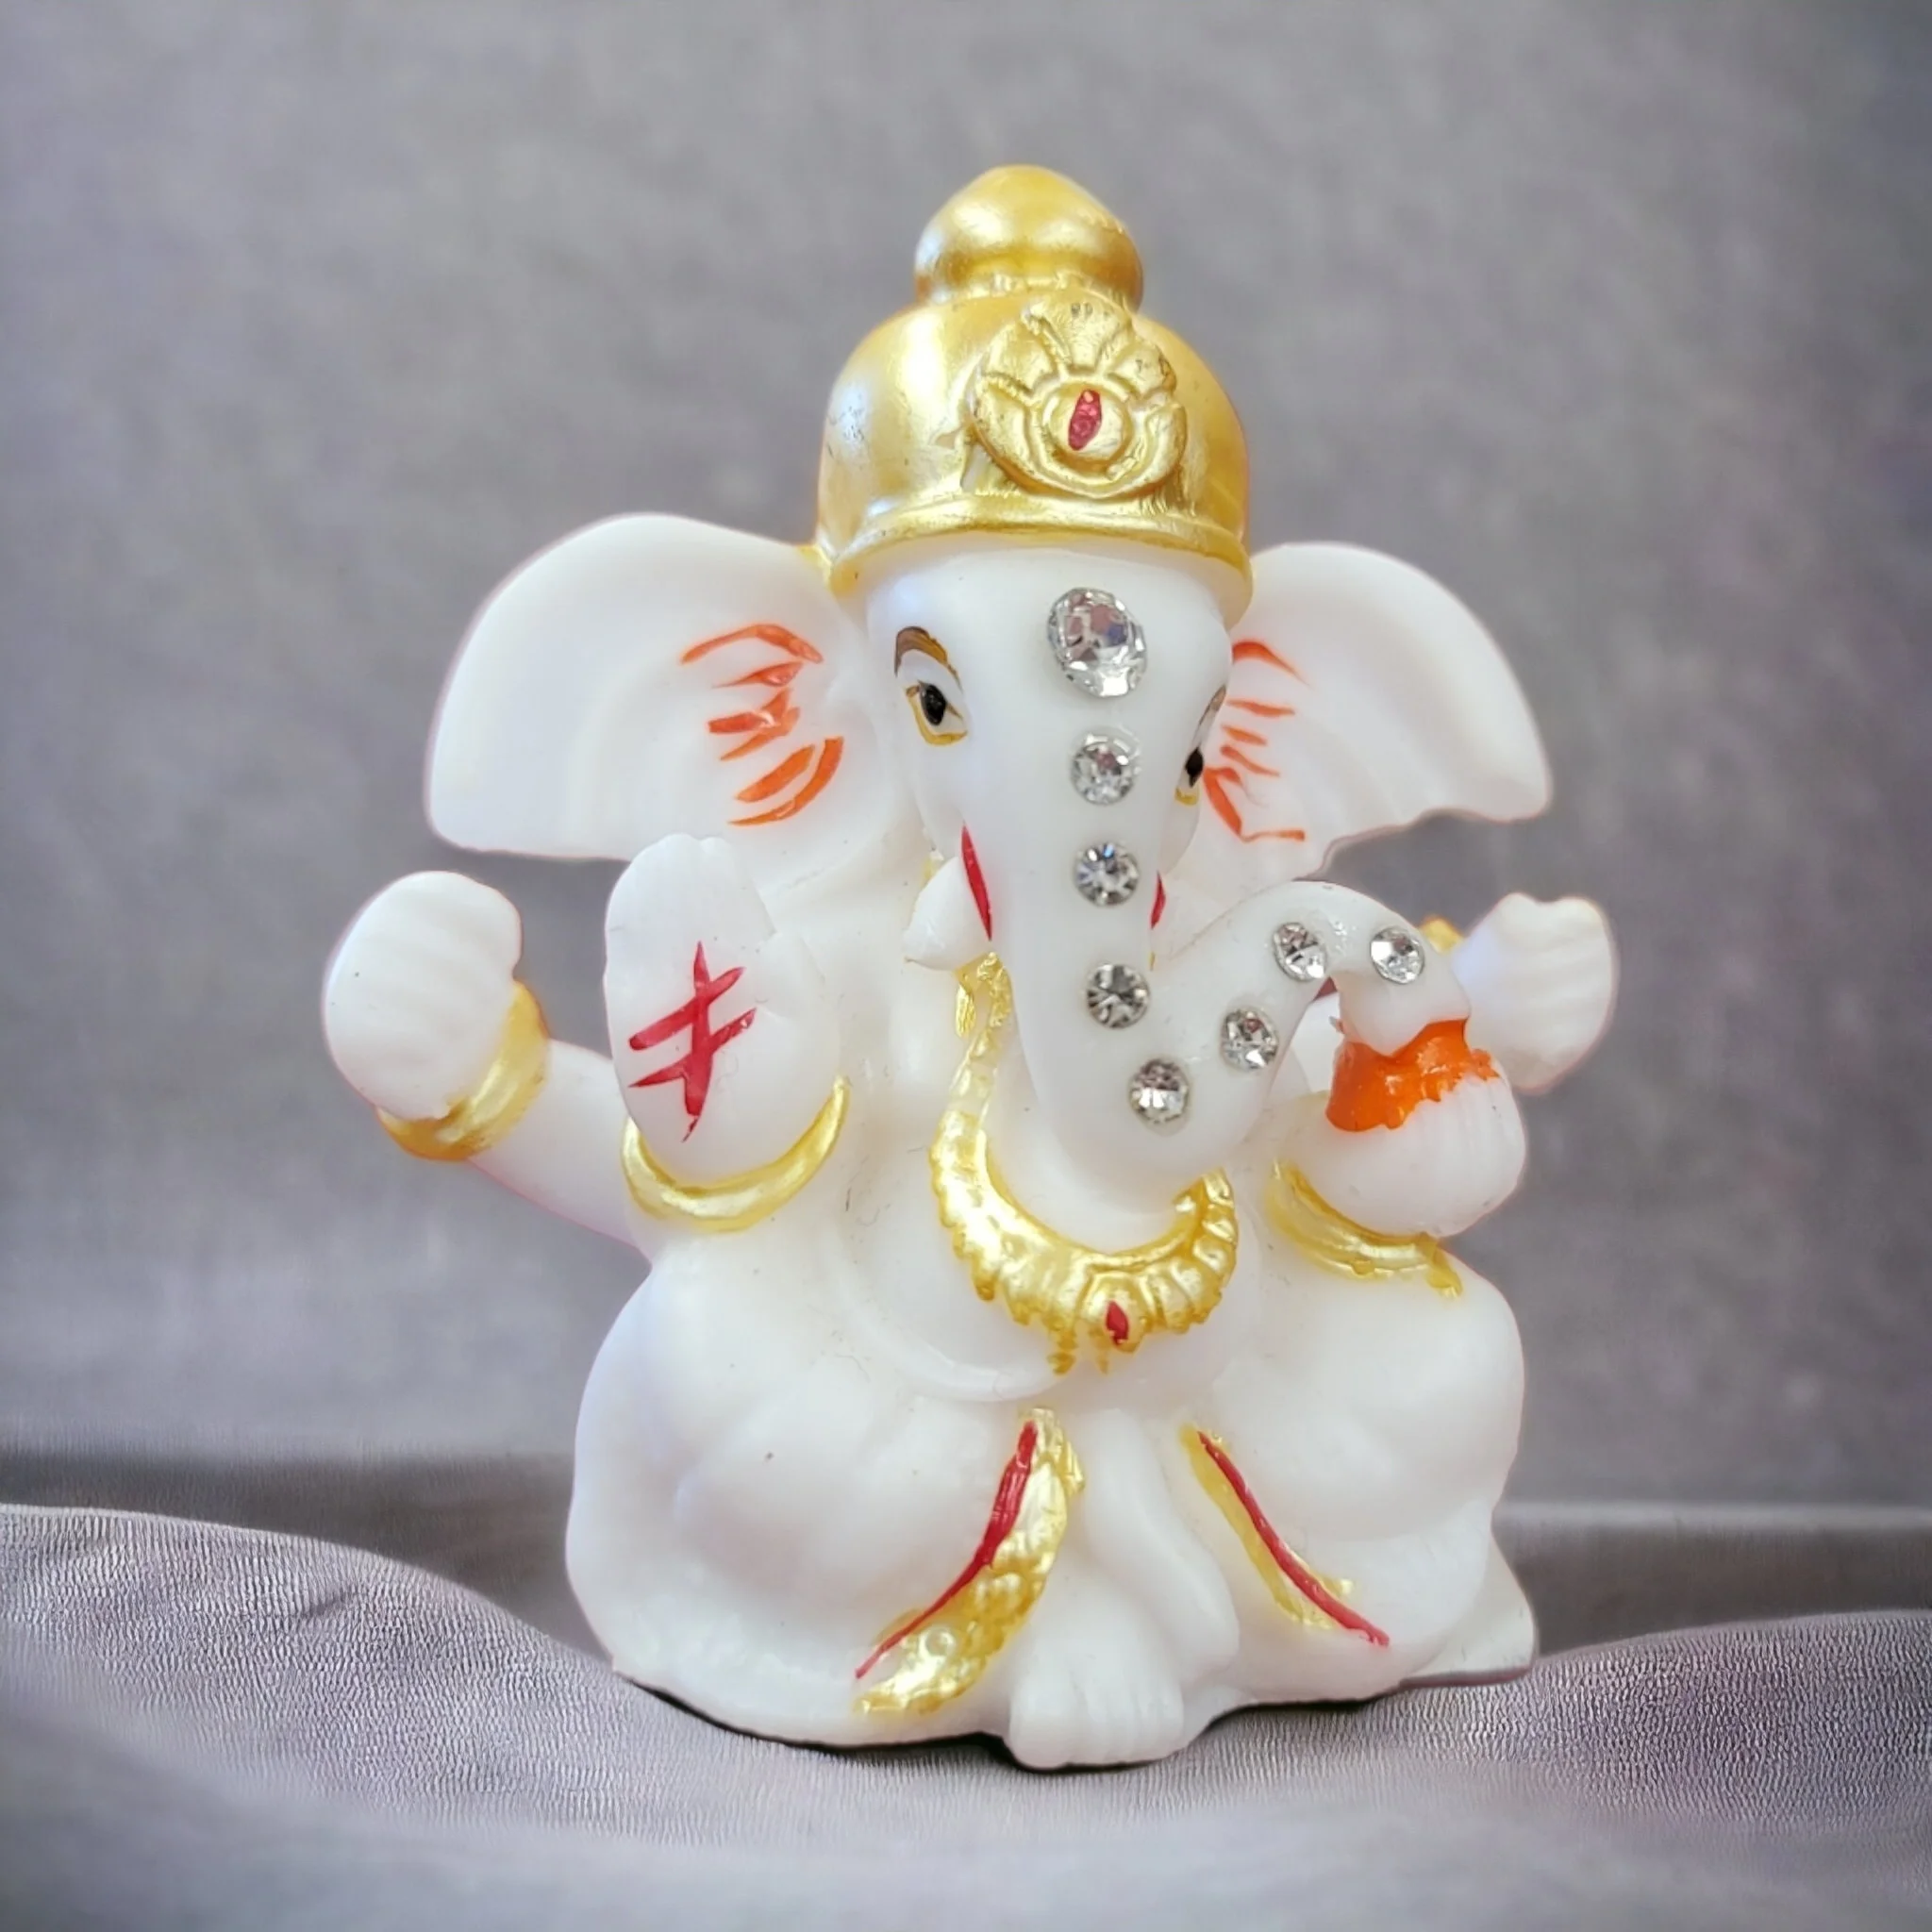 side view Image of a premium Ganesha car dashboard idol - 6004. Ships in Canada and the US only.